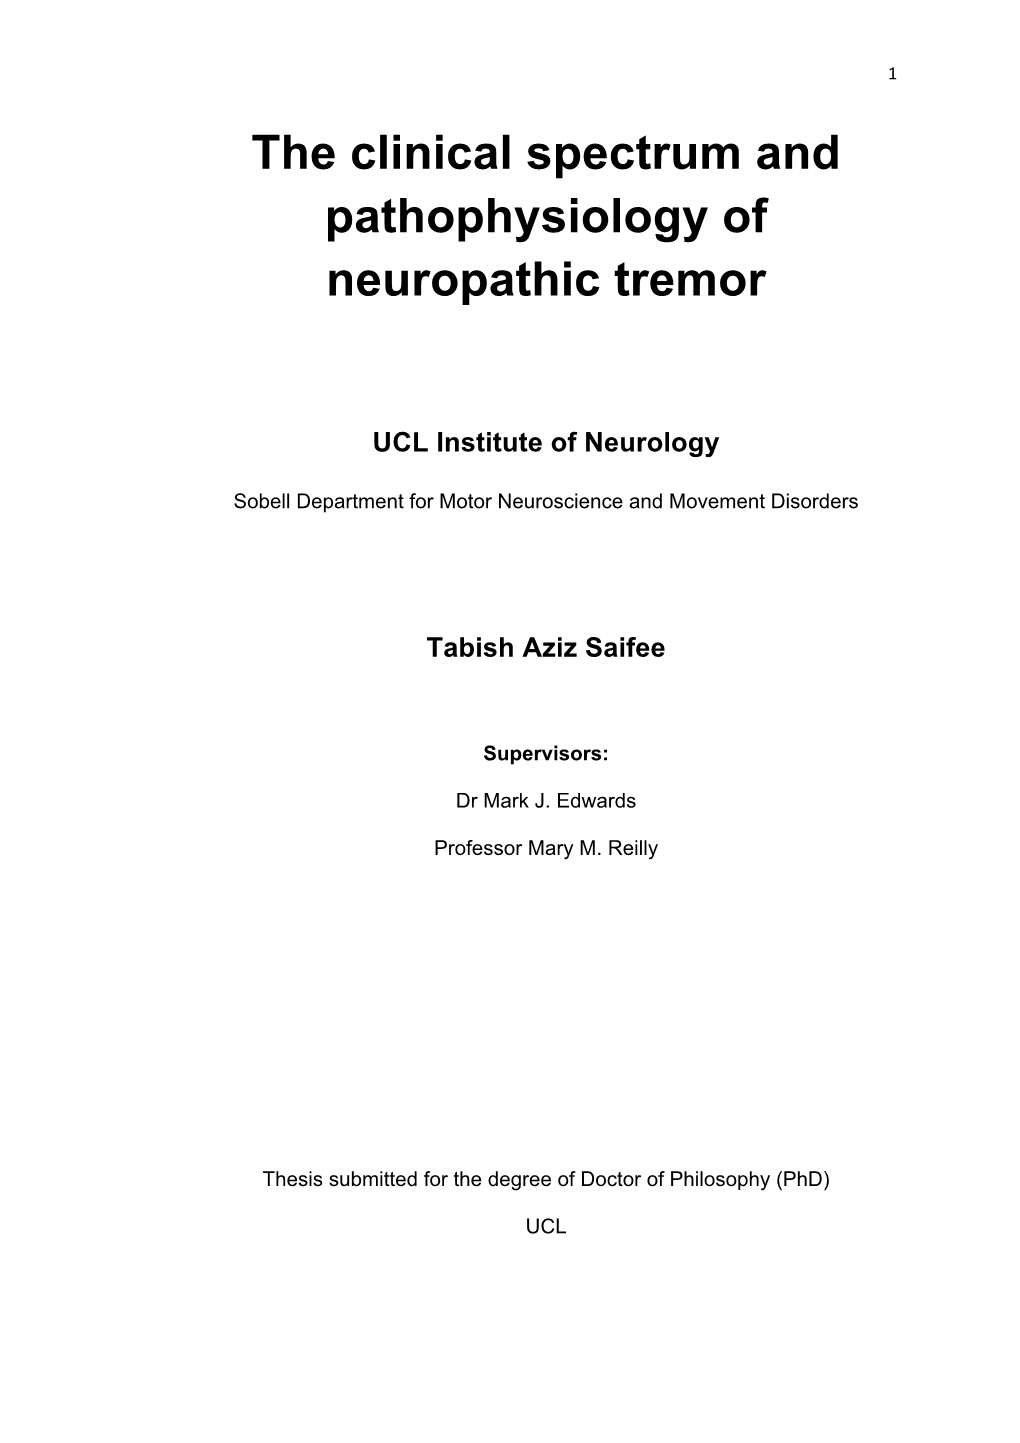 The Clinical Spectrum and Pathophysiology of Neuropathic Tremor